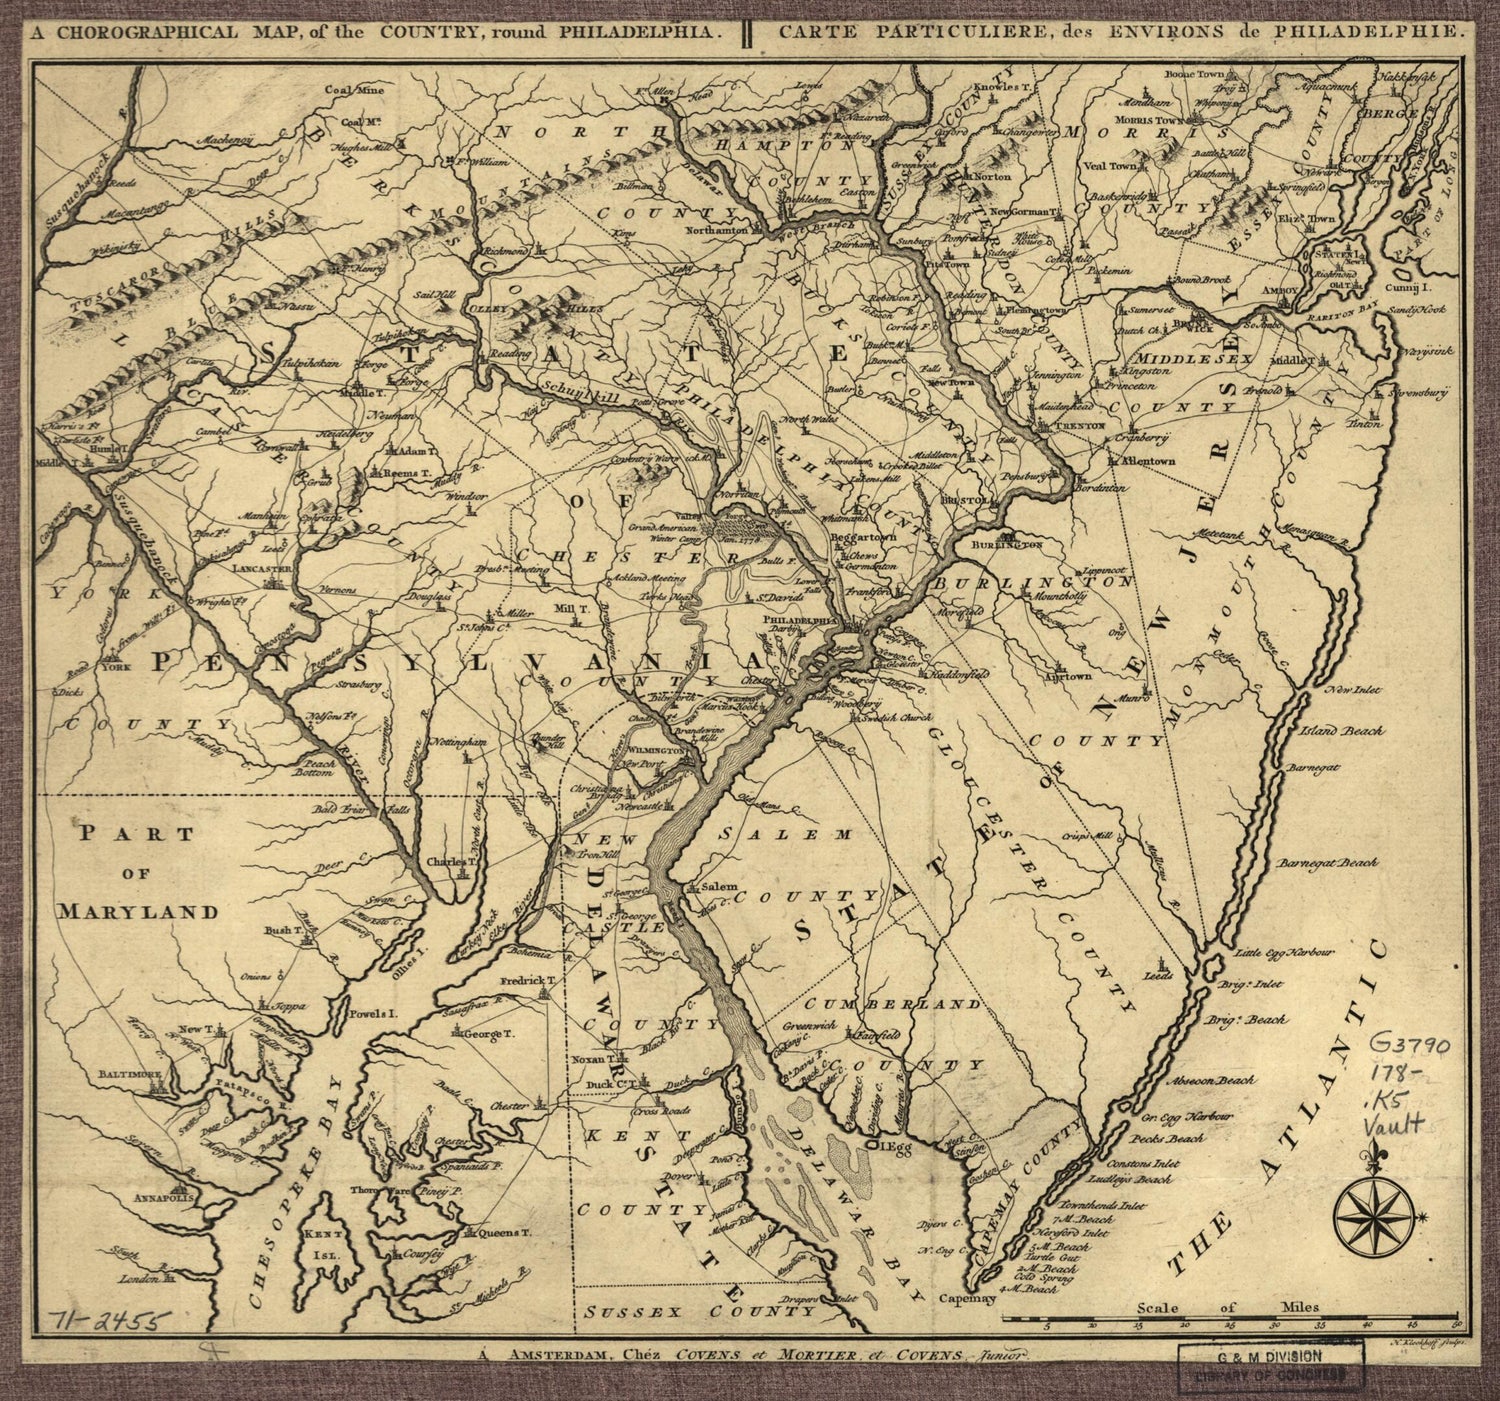 This old map of A Chorographical Map, of the Country, Round Philadelphia. Carte Particuliere, Des Environs De Philadelphie from 1780 was created by Junior Cóvens Et Mortier Et Cóvens, H. Klockhoff in 1780